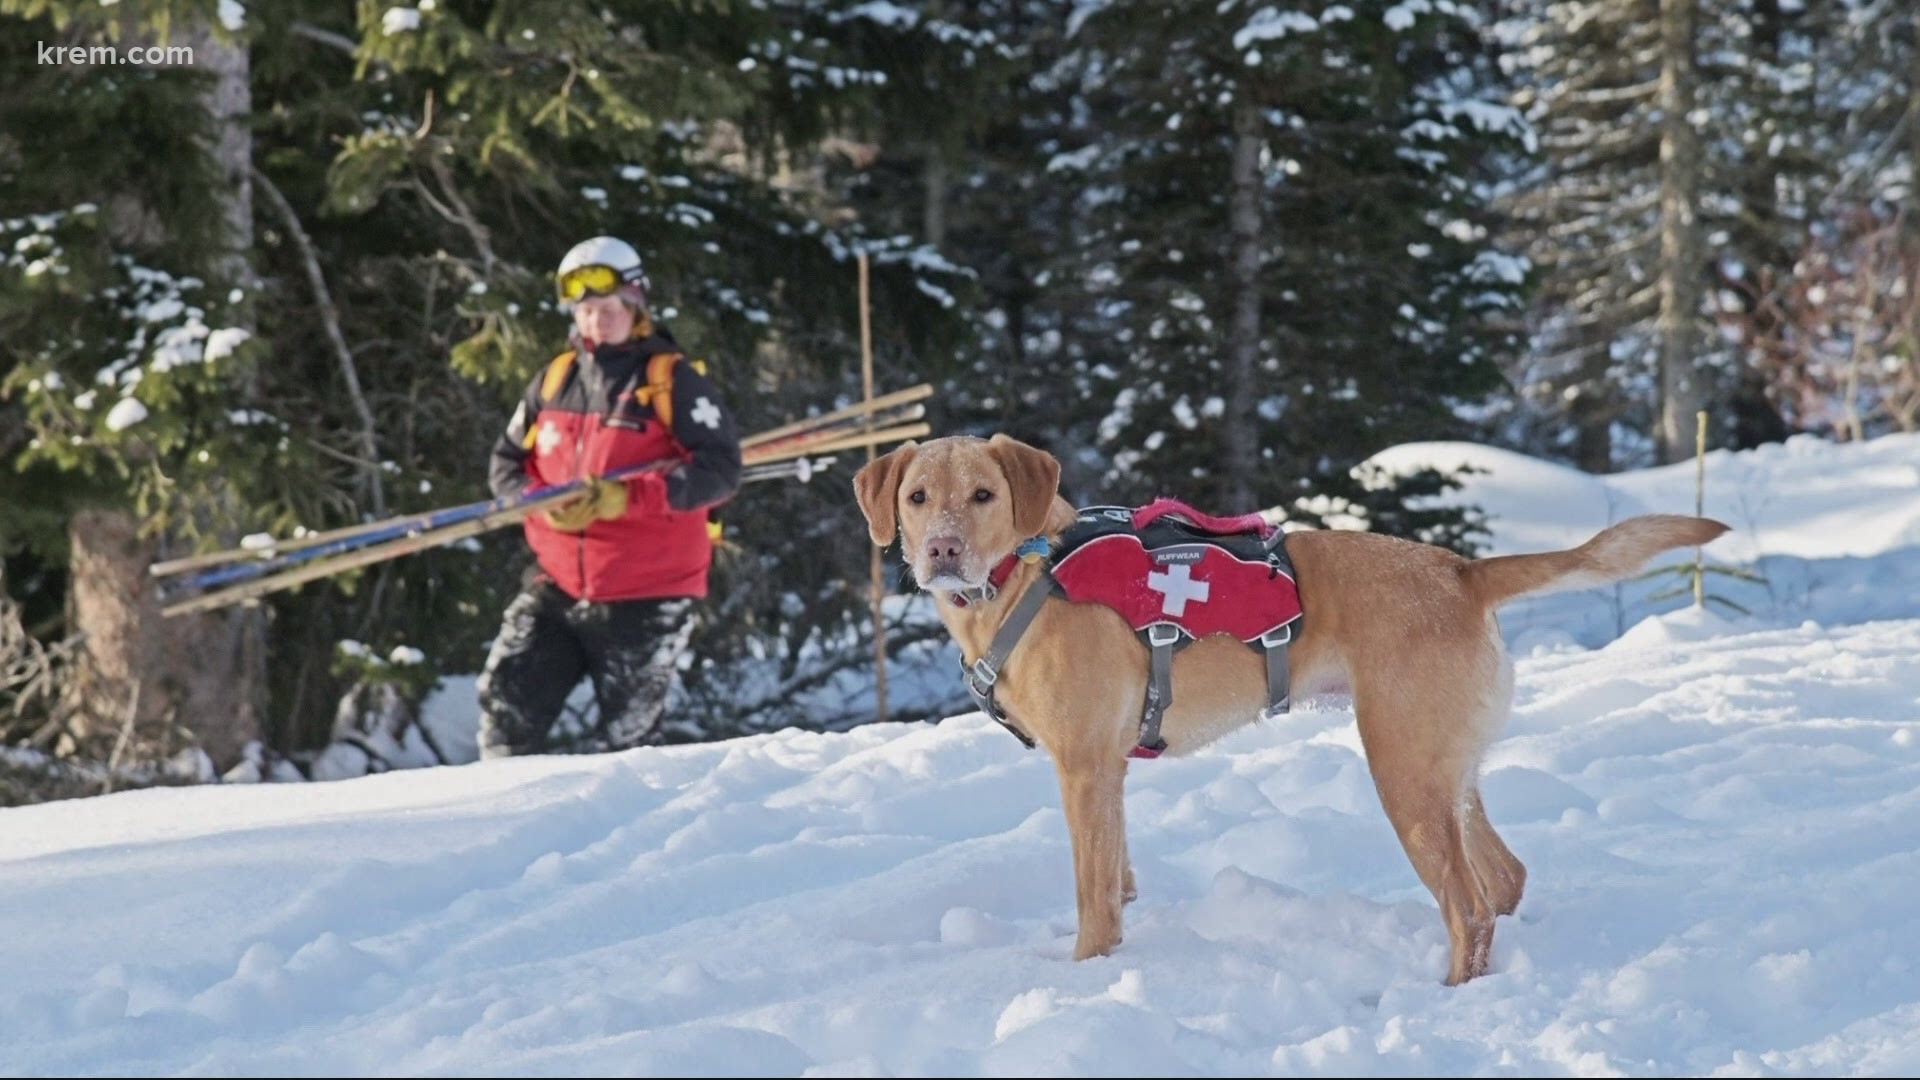 The dogs' primary job is to sniff people out of the snow so their handlers can dig those people out in the event of an avalanche at Schweitzer.